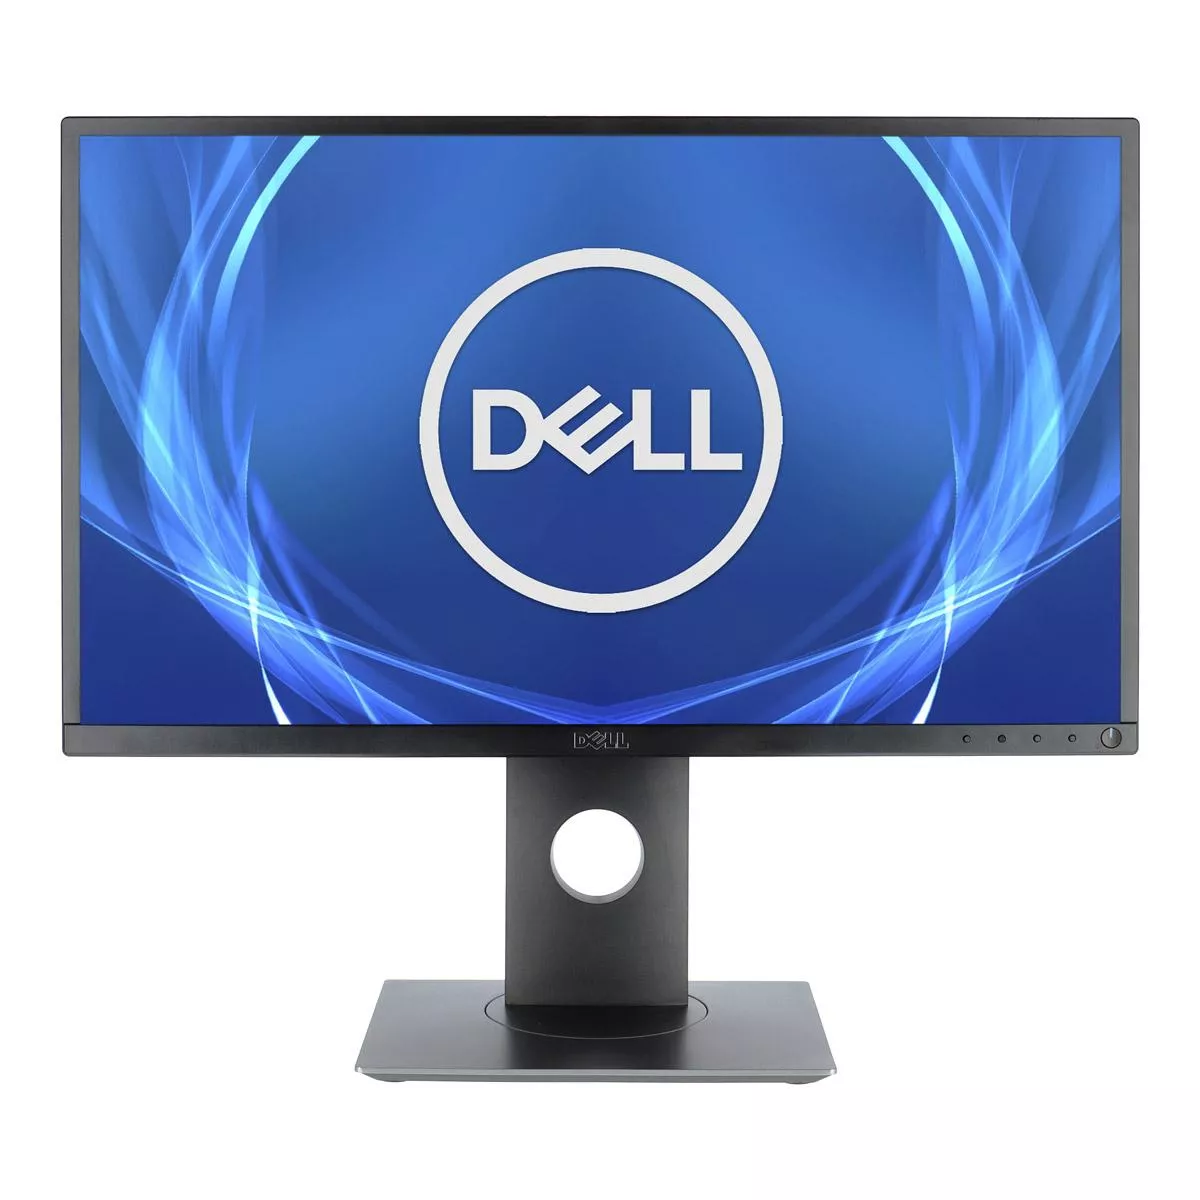 Dell P2217 21,5 Zoll1680x1050 LED schwarz/silber A+